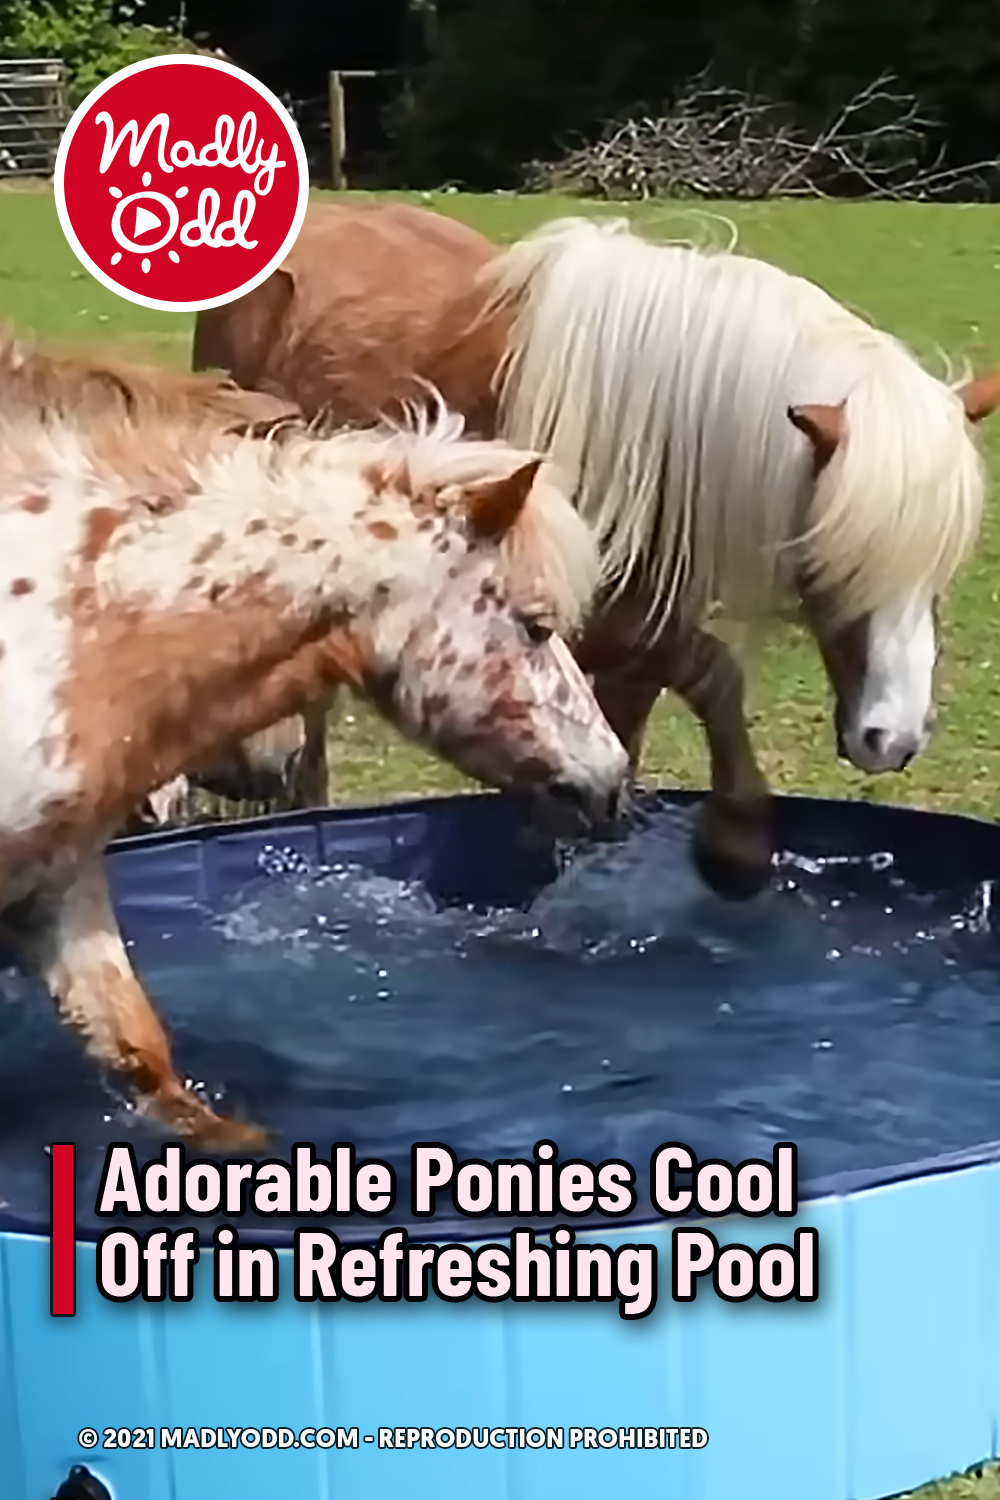 Adorable Ponies Cool Off in Refreshing Pool